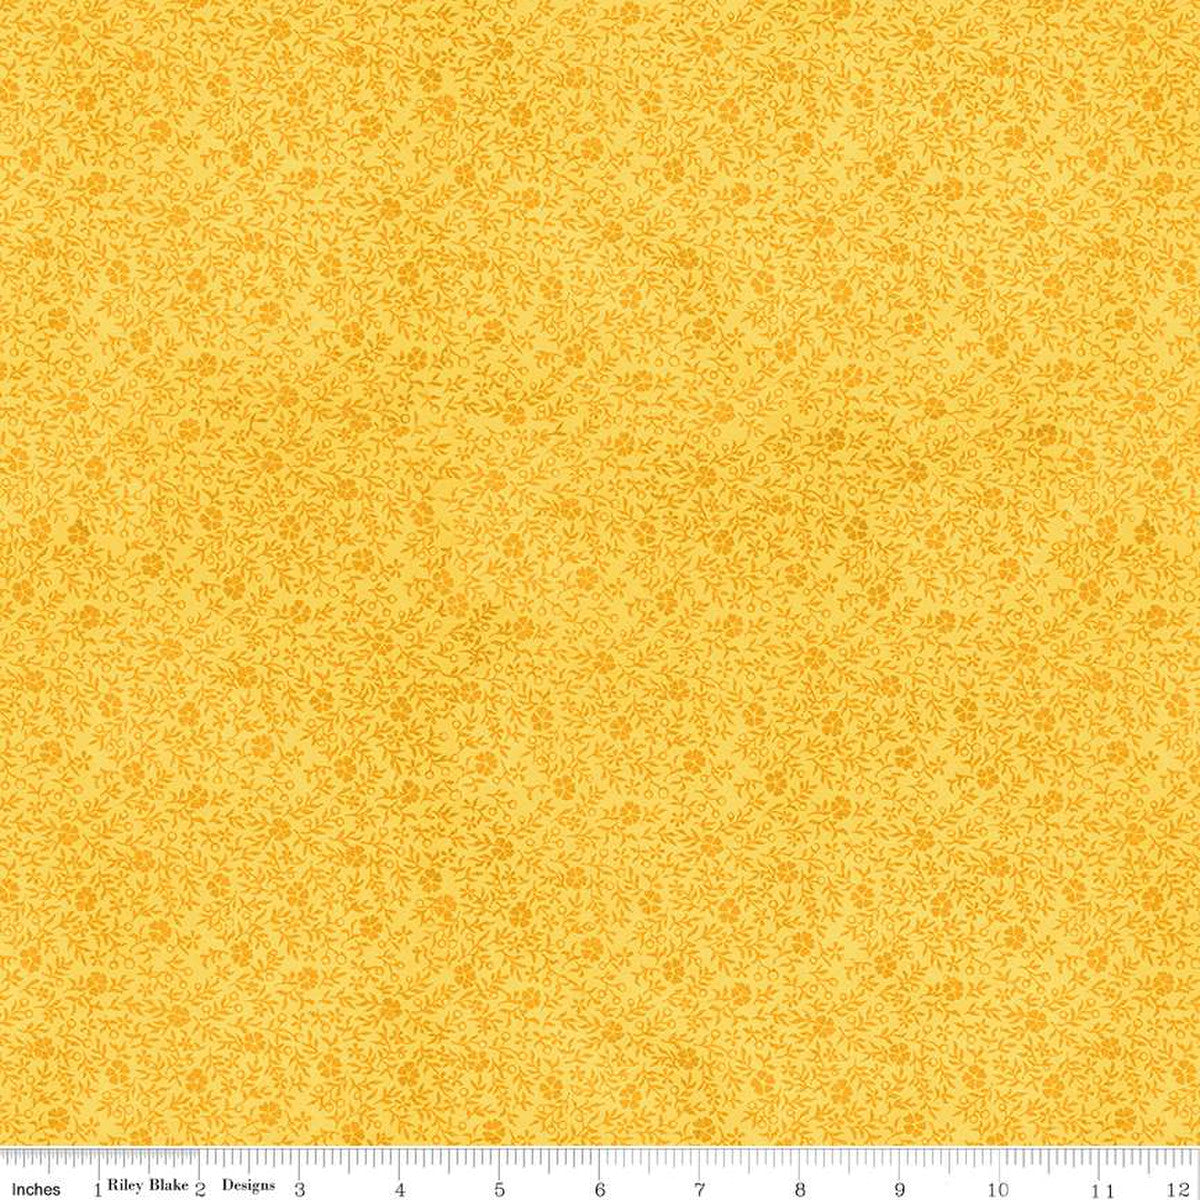 Art Journal by J. Wecker Frisch for Riley Blake Designs cotton quilt weight fabric for quilting sewing bags garments project tone on tone small yellow golden flowers calico style densly clustered